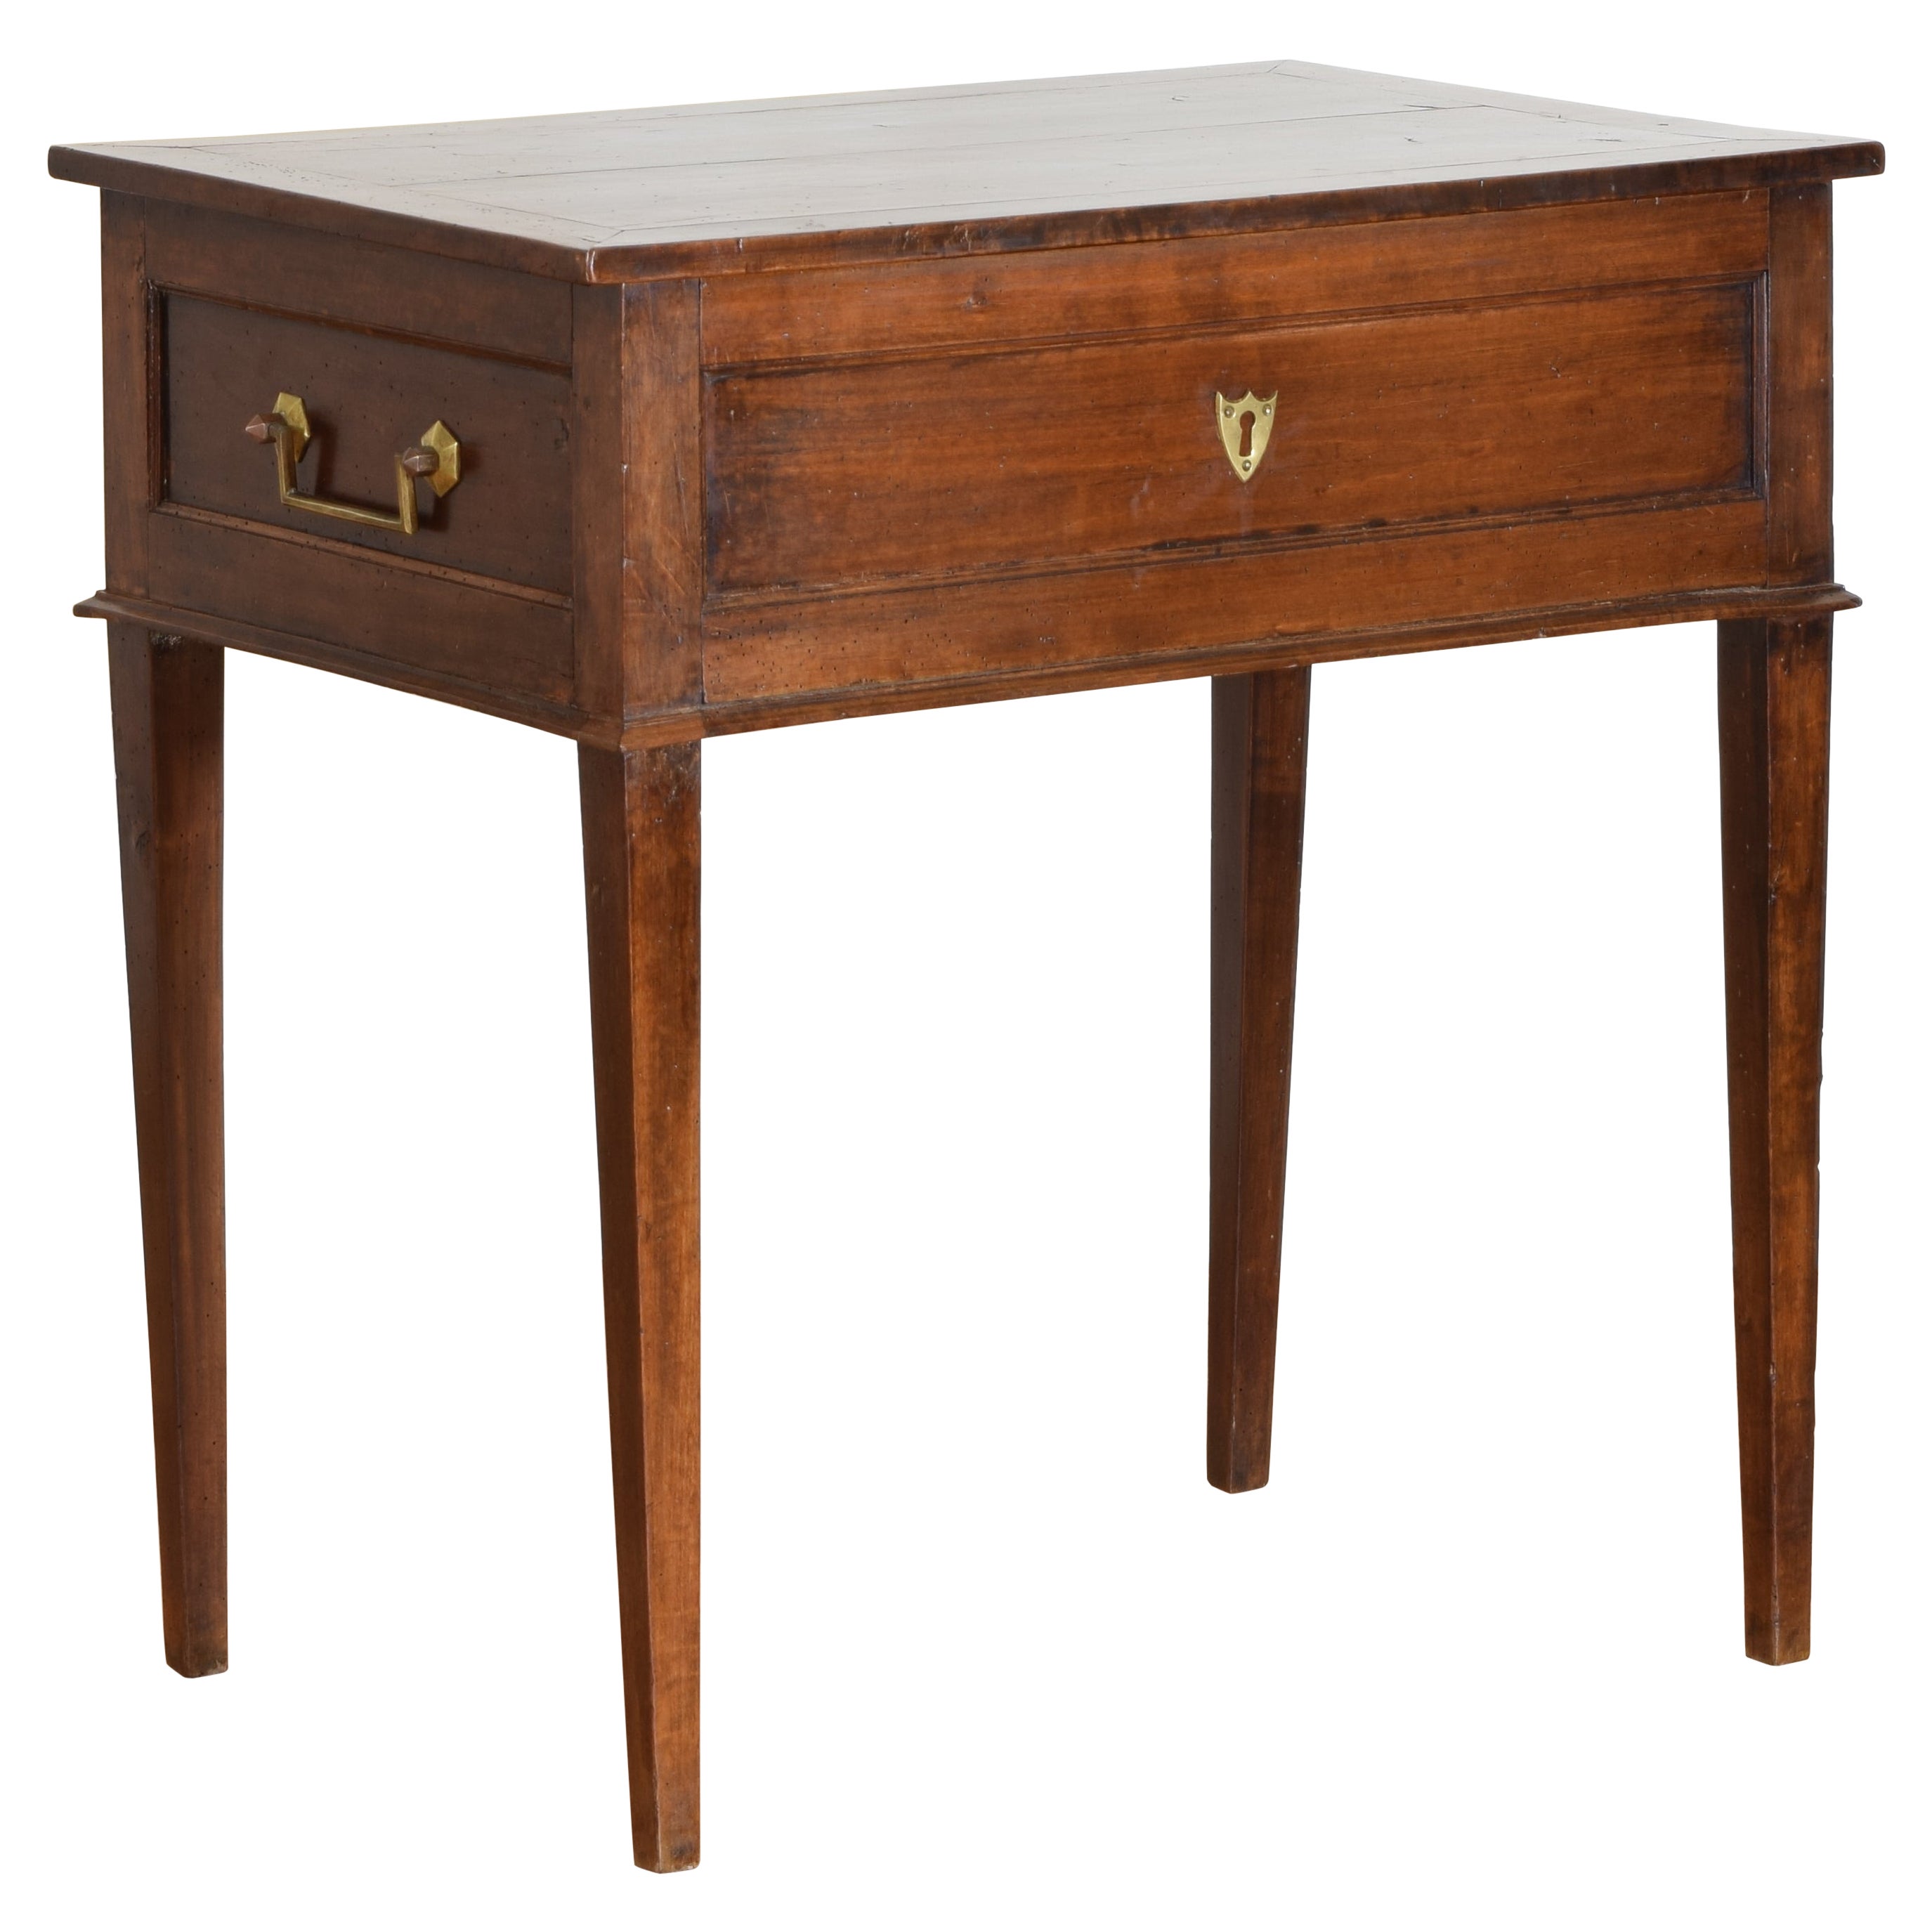 French Neoclassic Walnut Hinged Top & Brass Handled Vanity Table, ca. 1825 For Sale